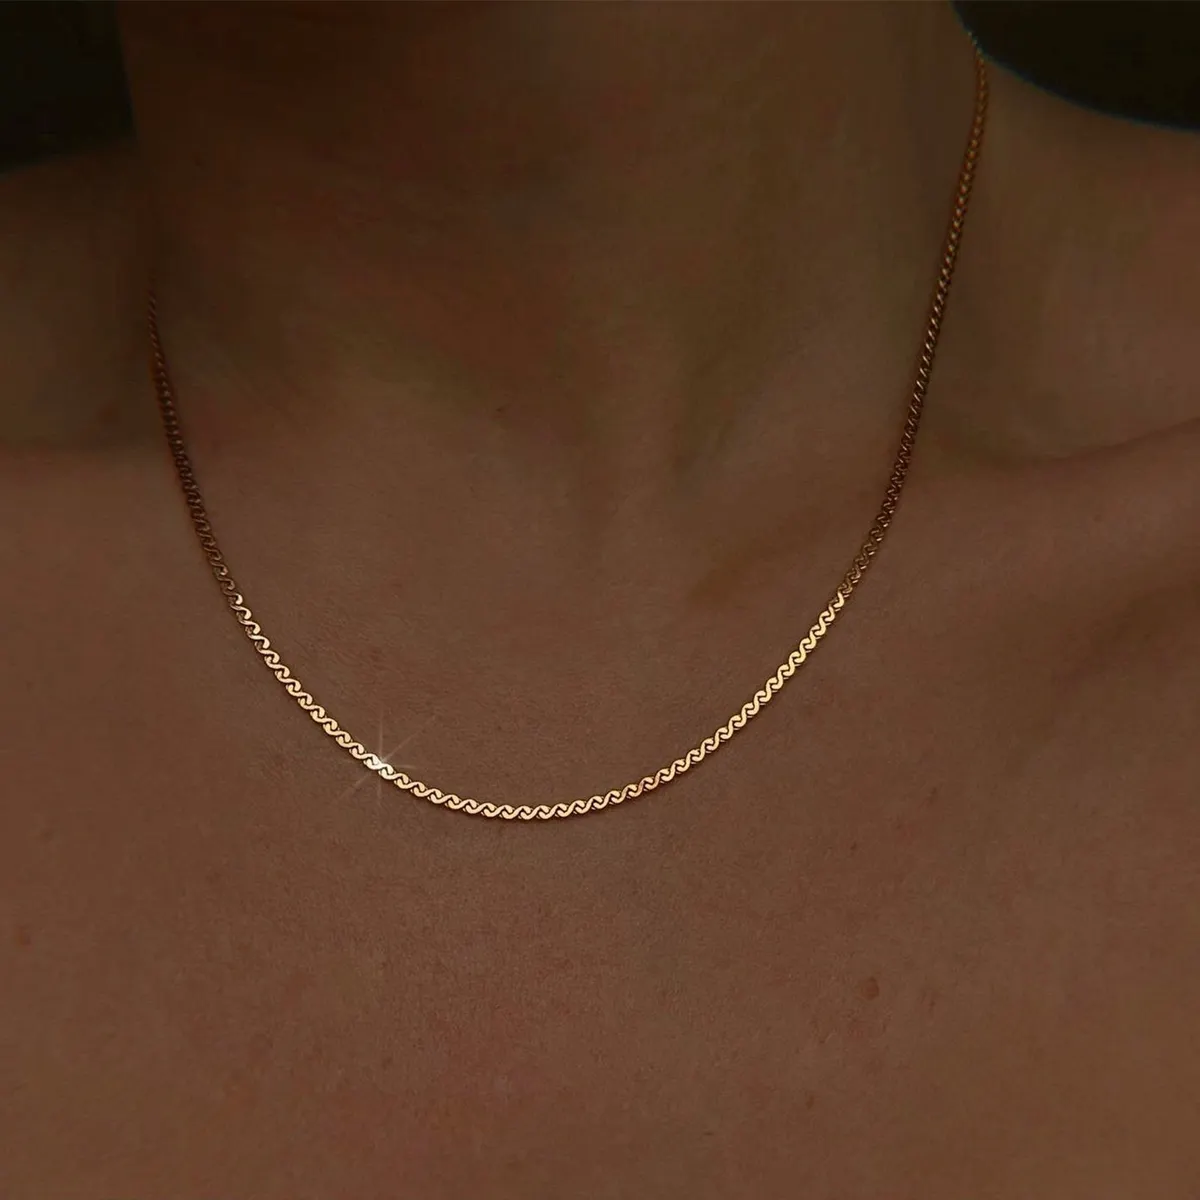 2022 Trendy Thin Twist Chain Necklace Bracelet Dainty 18K Gold Plated Stainless Steel Choker Necklace Jewelry Tarnish Free